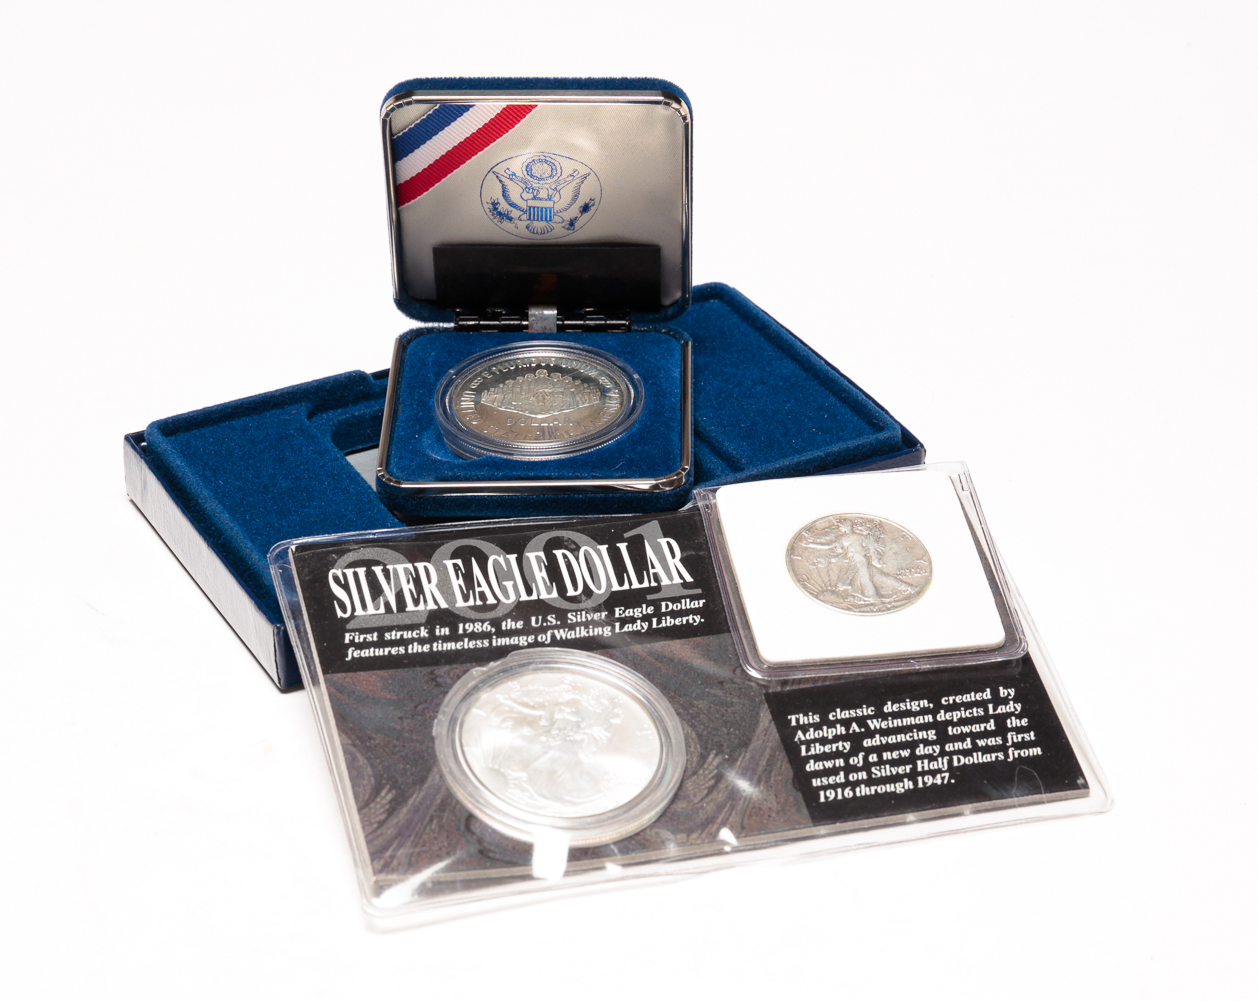 TWO SILVER COMMEMORATIVE COIN SETS